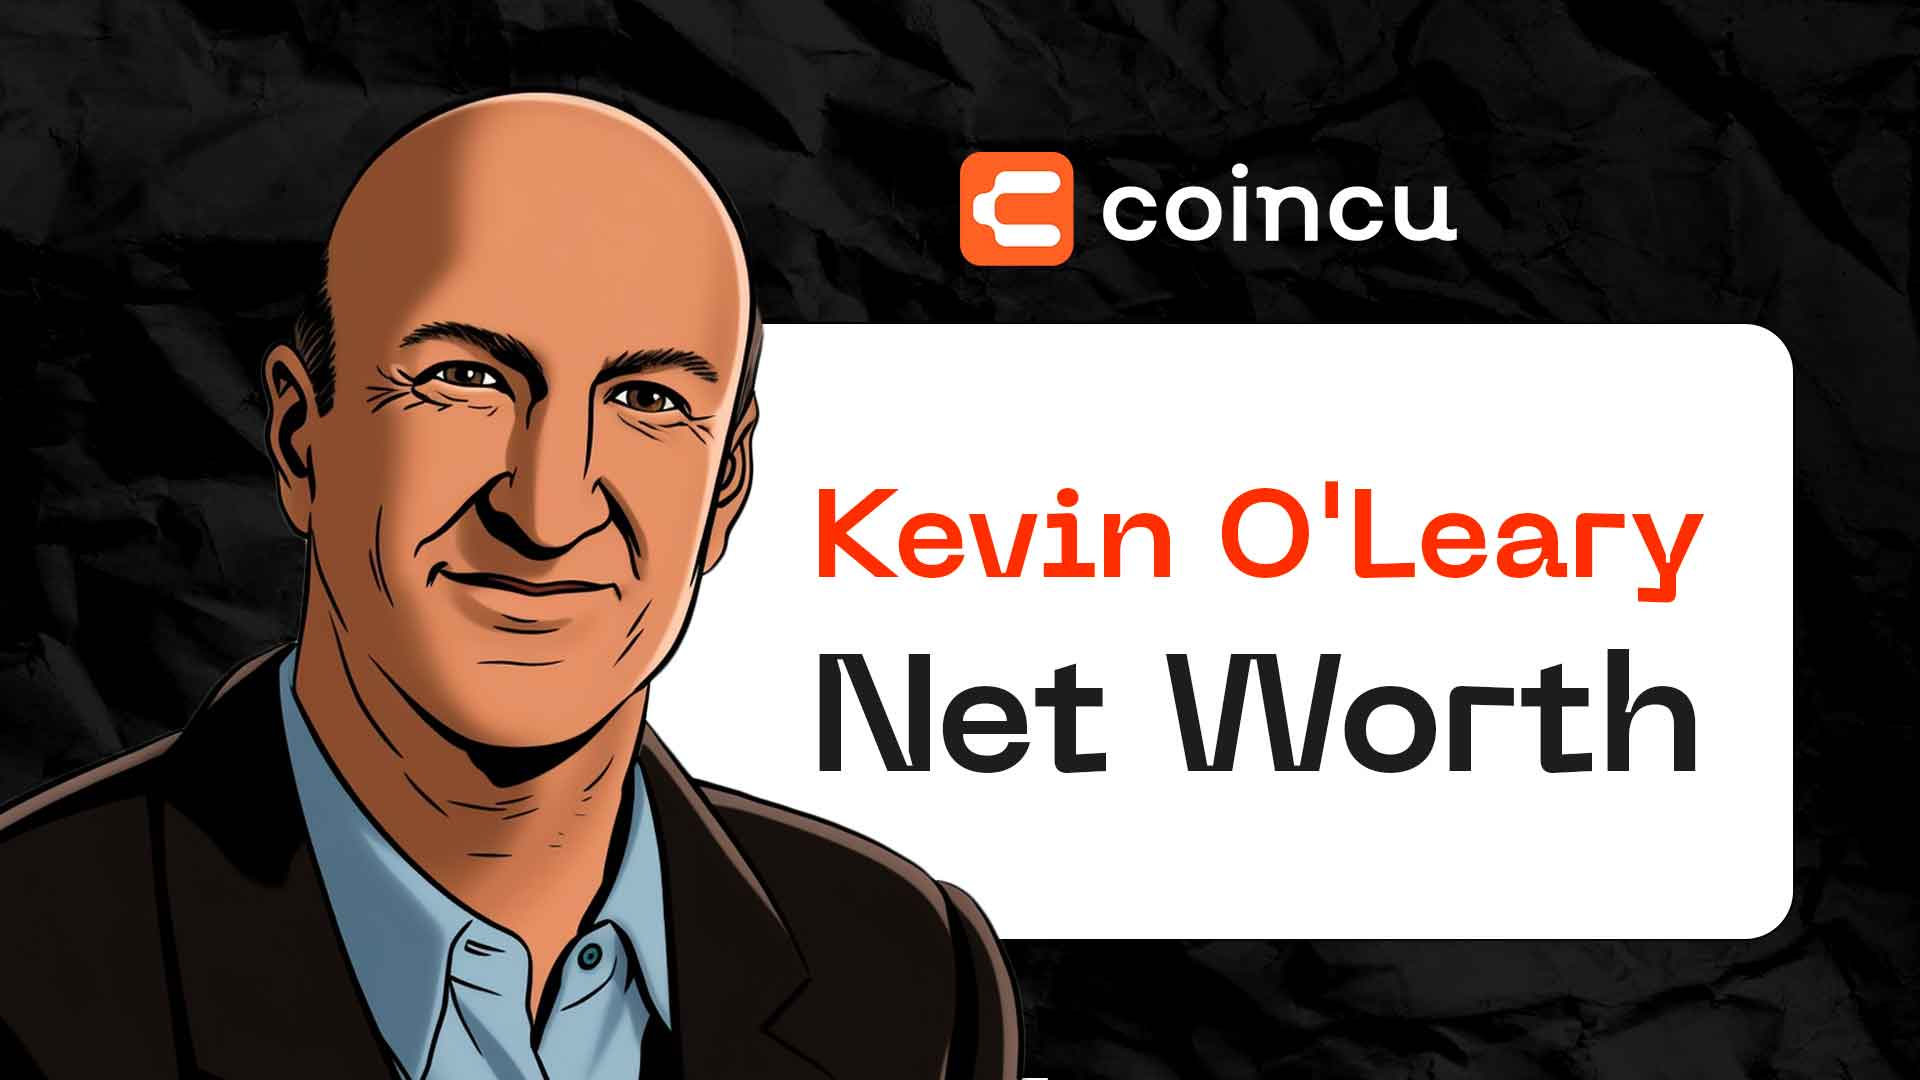 Kevin O’Leary Net Worth: Mr. Wonderful’s Business Acumen and Shark Tank Fame